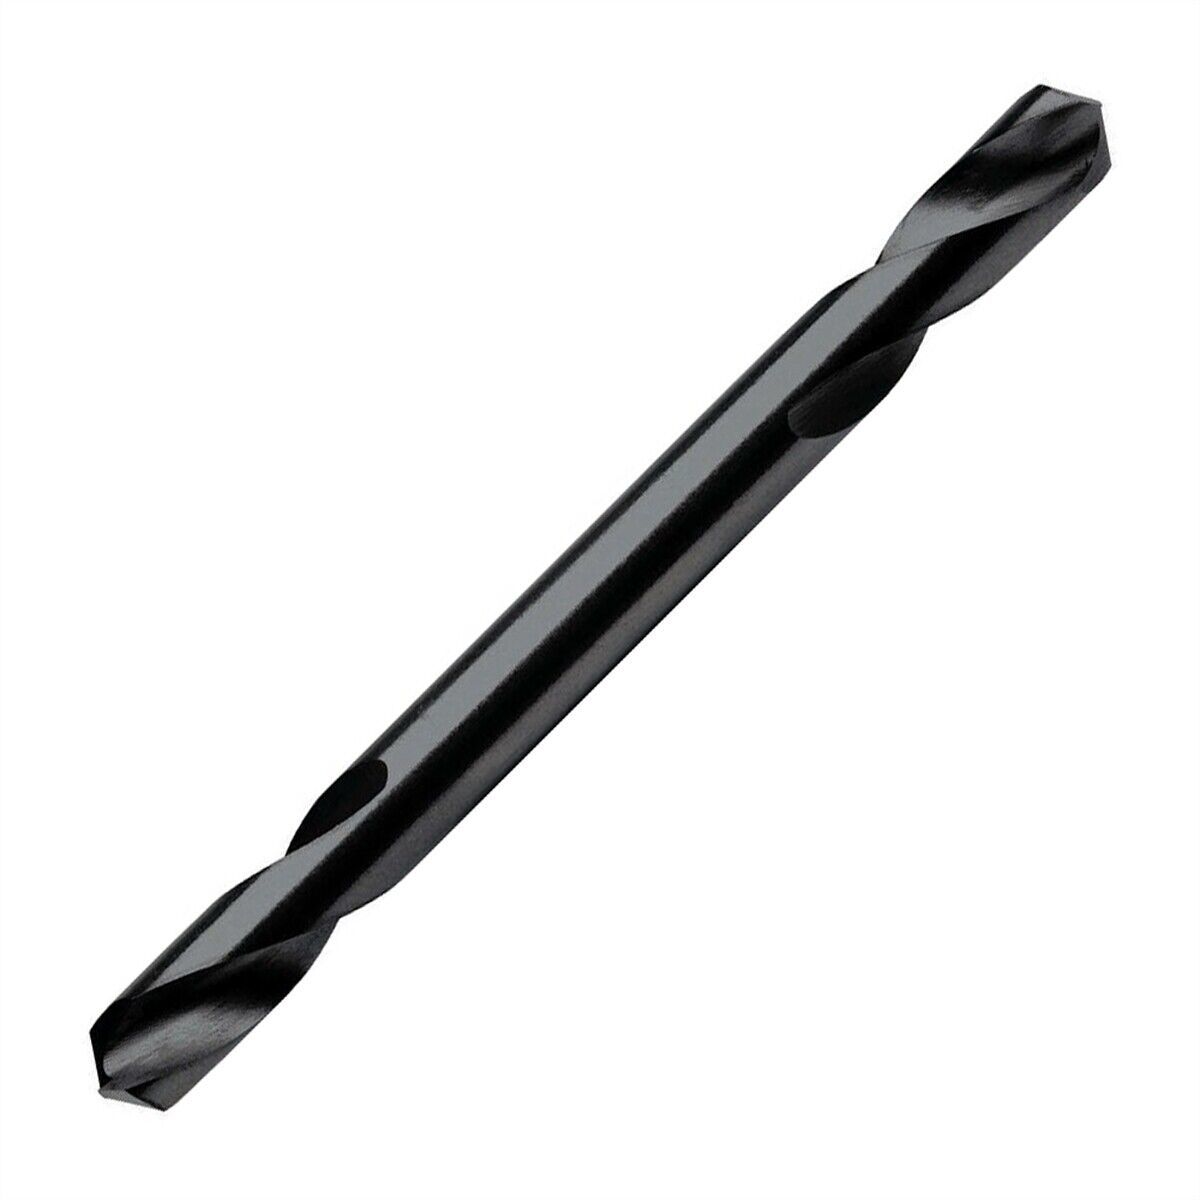 1 Double-End Black Oxide Coated High Speed Steel Fractional Drill Bit - 3/16"